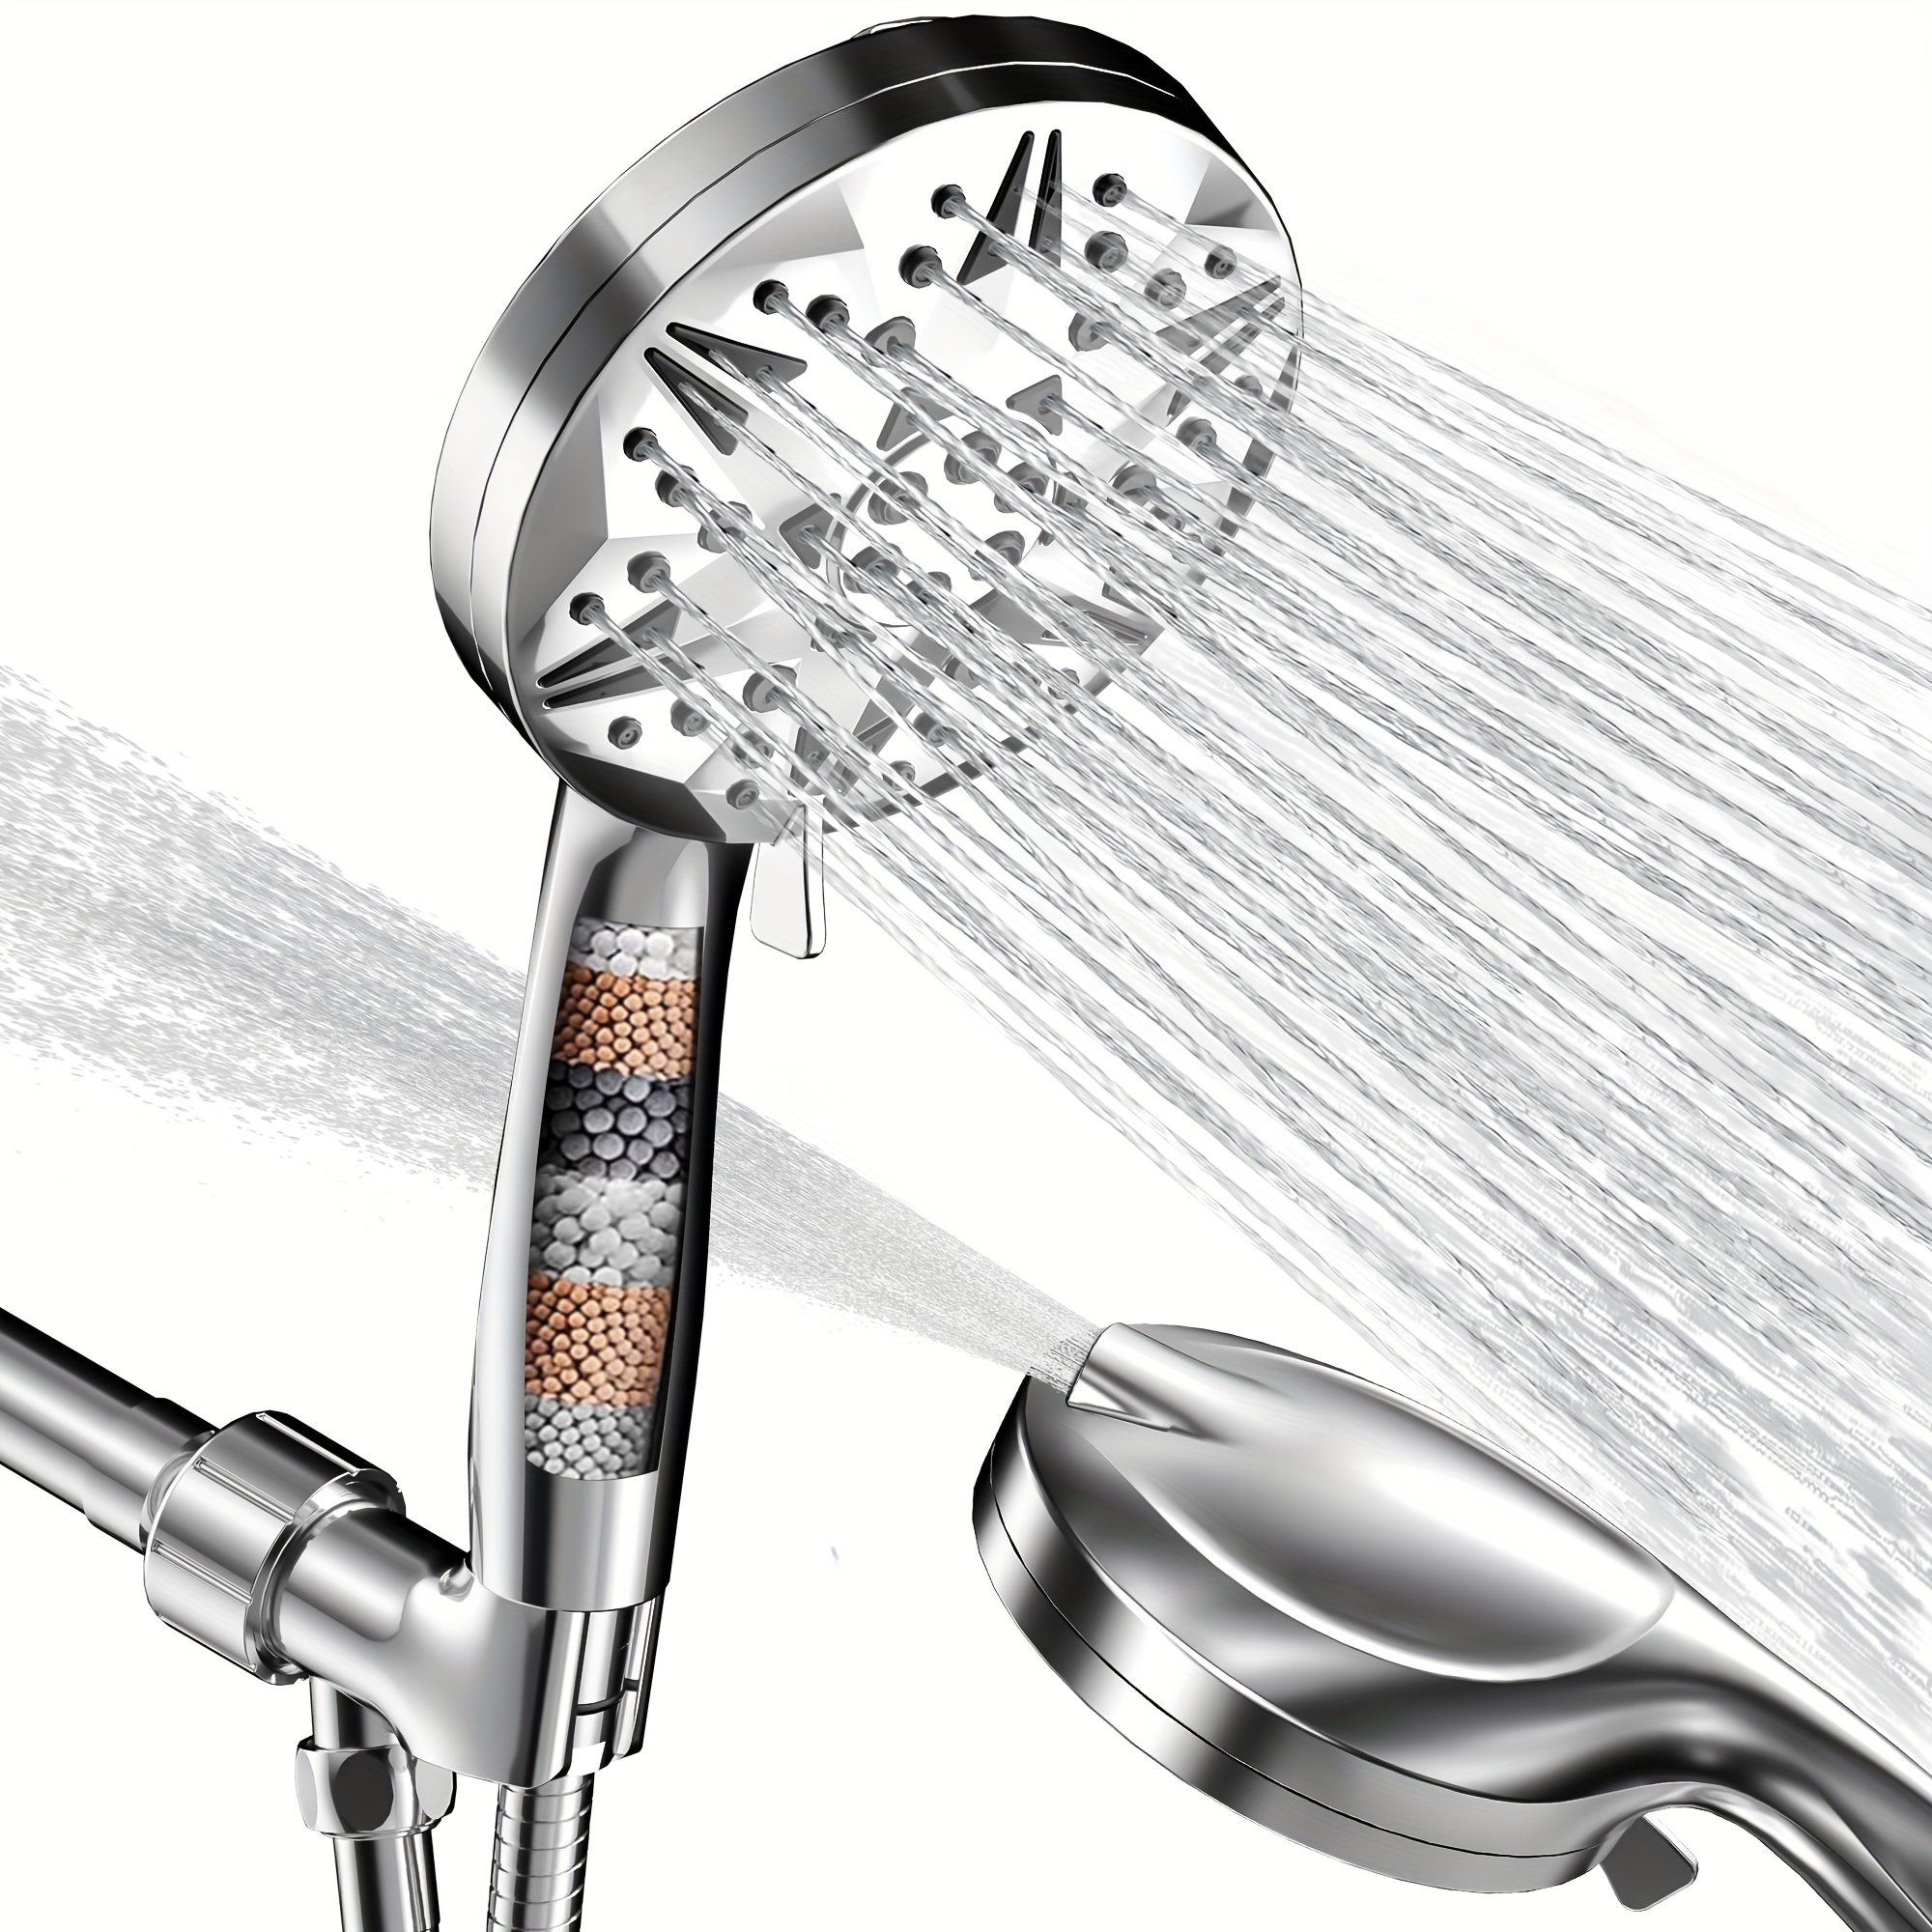 

Shower Head With Handheld - High Press Filtered Shower Head With Extra Long 5 Ft Hose, 8 Nozzle Types, Anti-clog Nozzles, Built-in Power Wash Self-cleaning, Water Saving, One-hand Adjustment